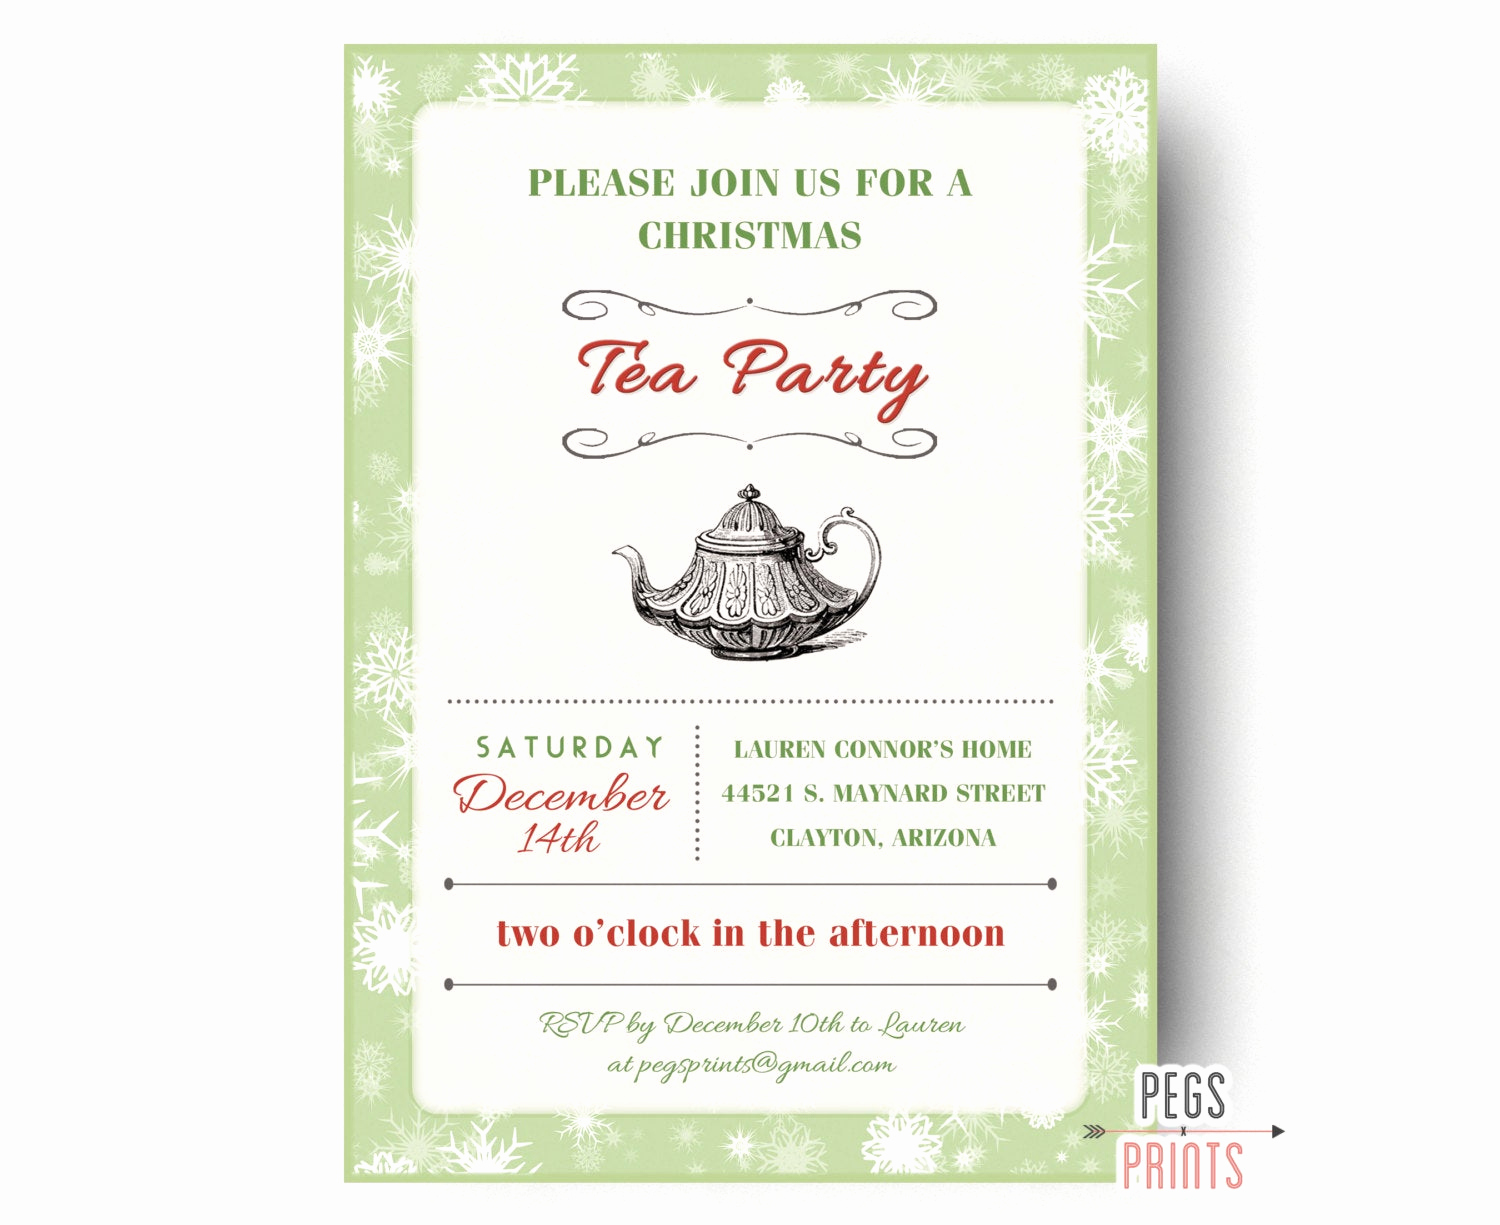 Invitation for Tea Party Inspirational Christmas Tea Party Invitation Printable Holiday Tea Party